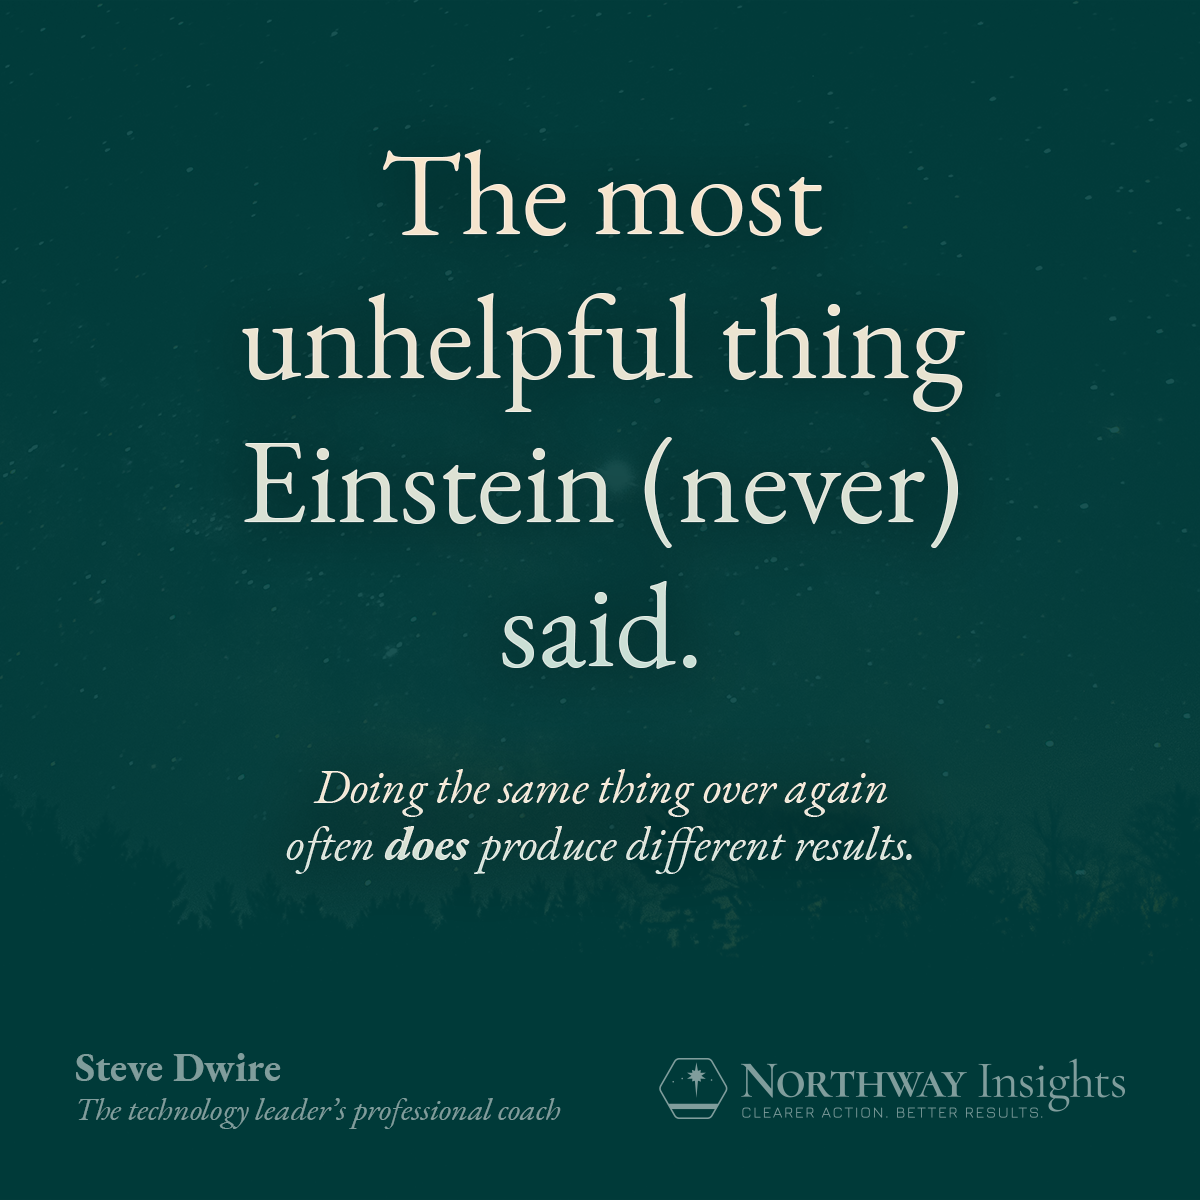 The most unhelpful thing Einstein (never) said. Doing the same thing over again often does produce different results.